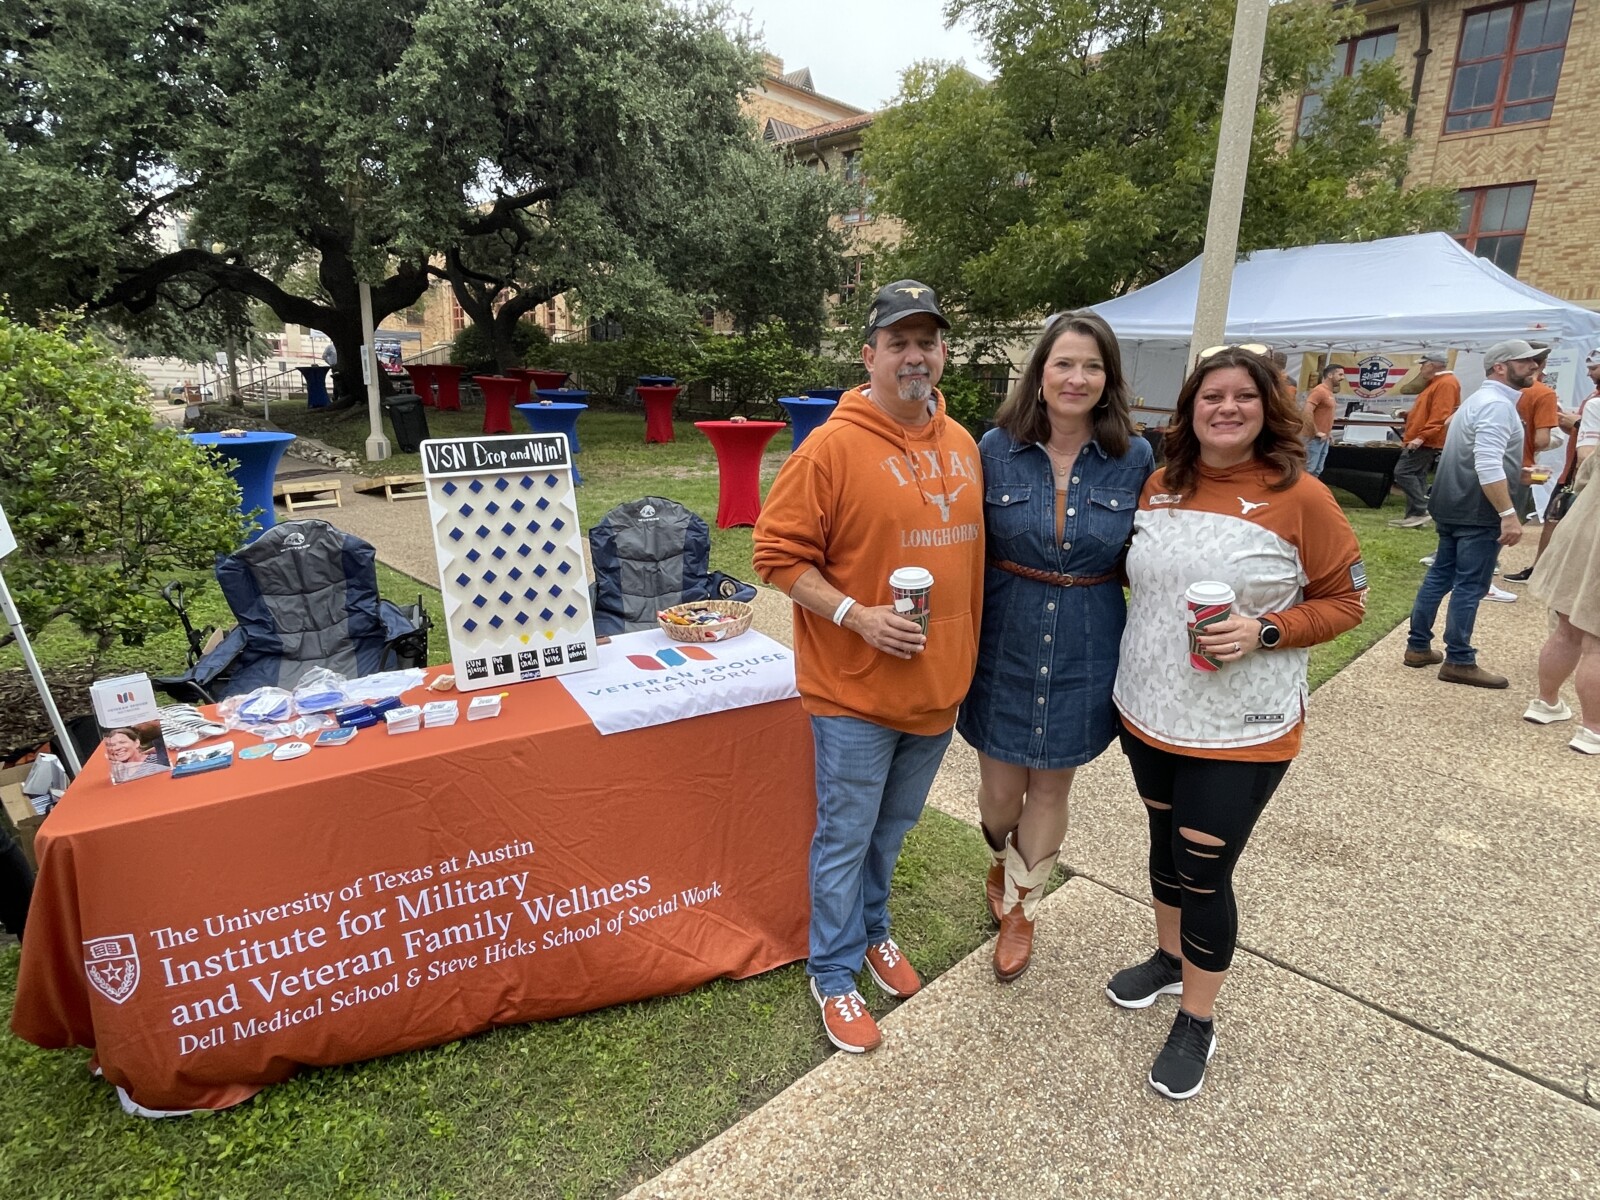 UT Tailgate at the Steve Hicks School of Social Work in front of the Veteran Spouse Network Table